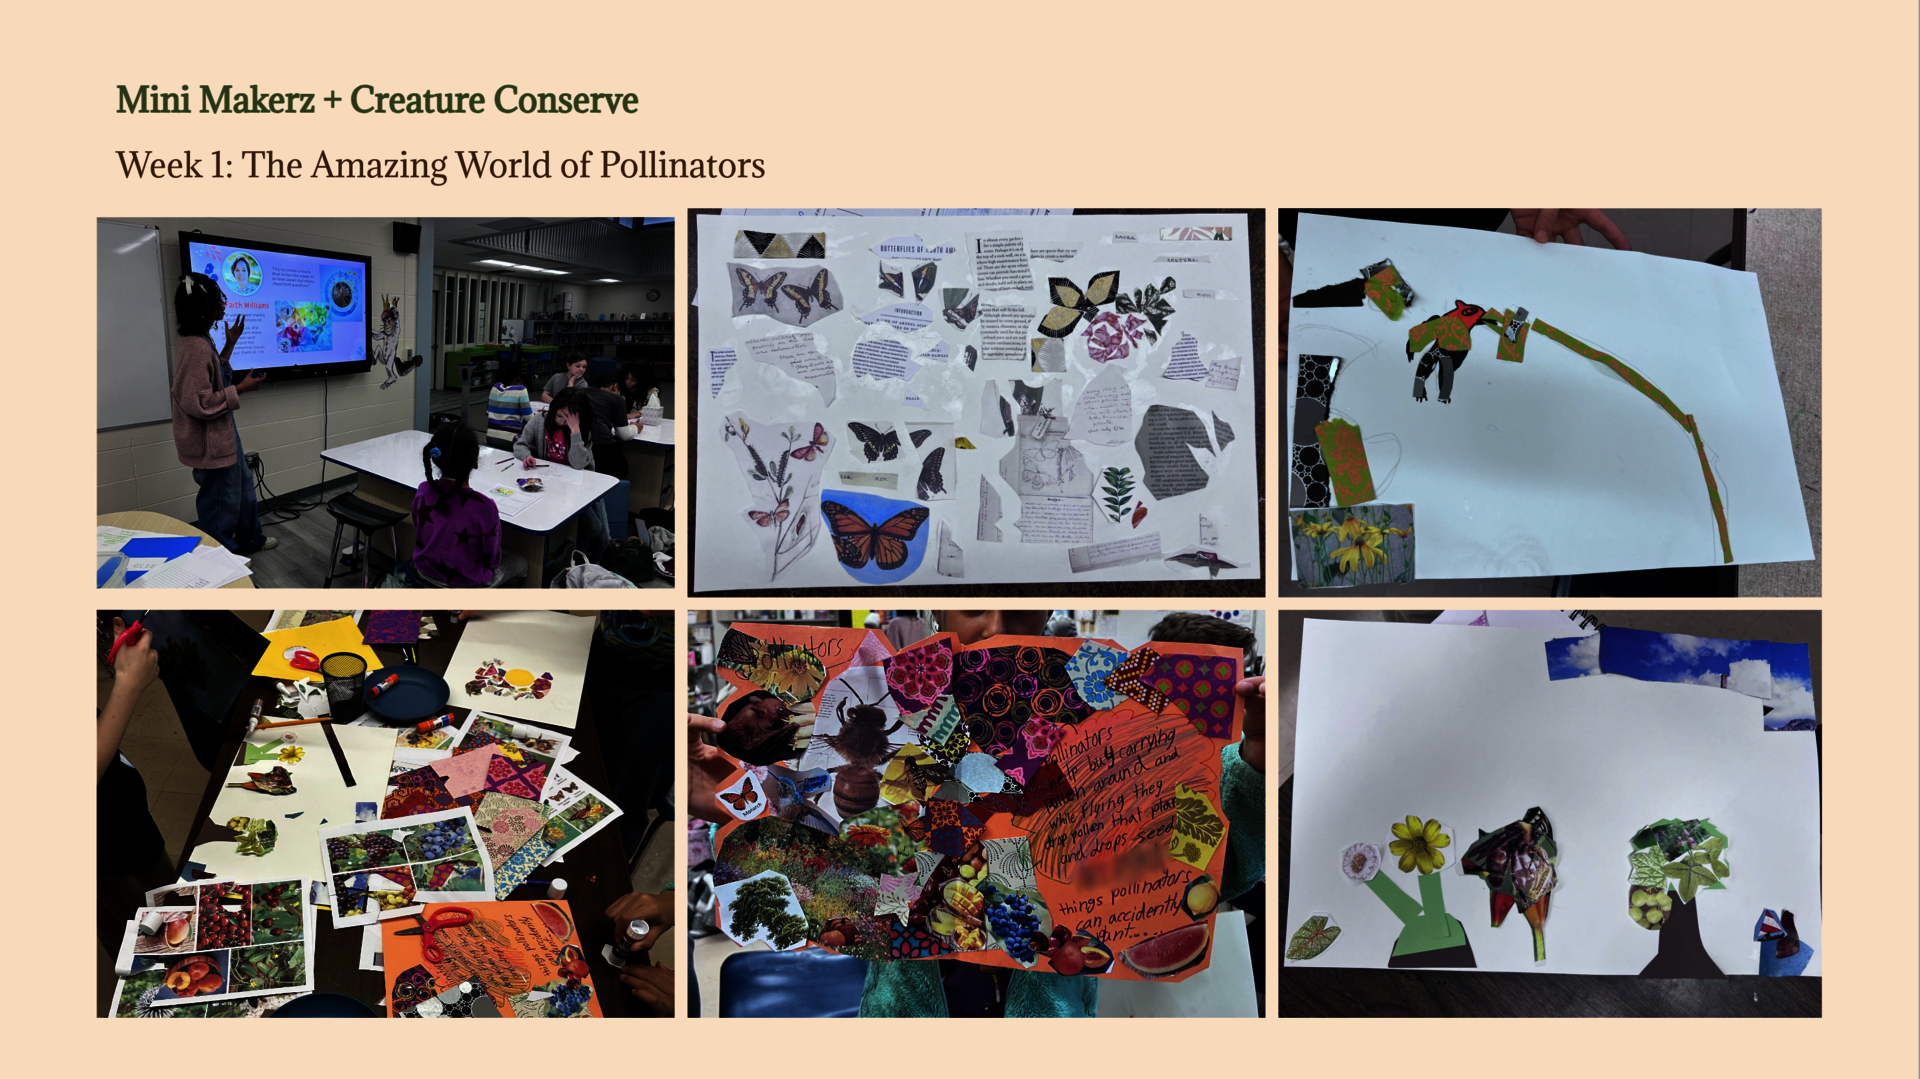 Collage: Teaching artist presenting to seated students filling out worksheets. Student collages about pollinators featuring cut-out images and patterned paper. Process images depicting students actively engaged in art creation.